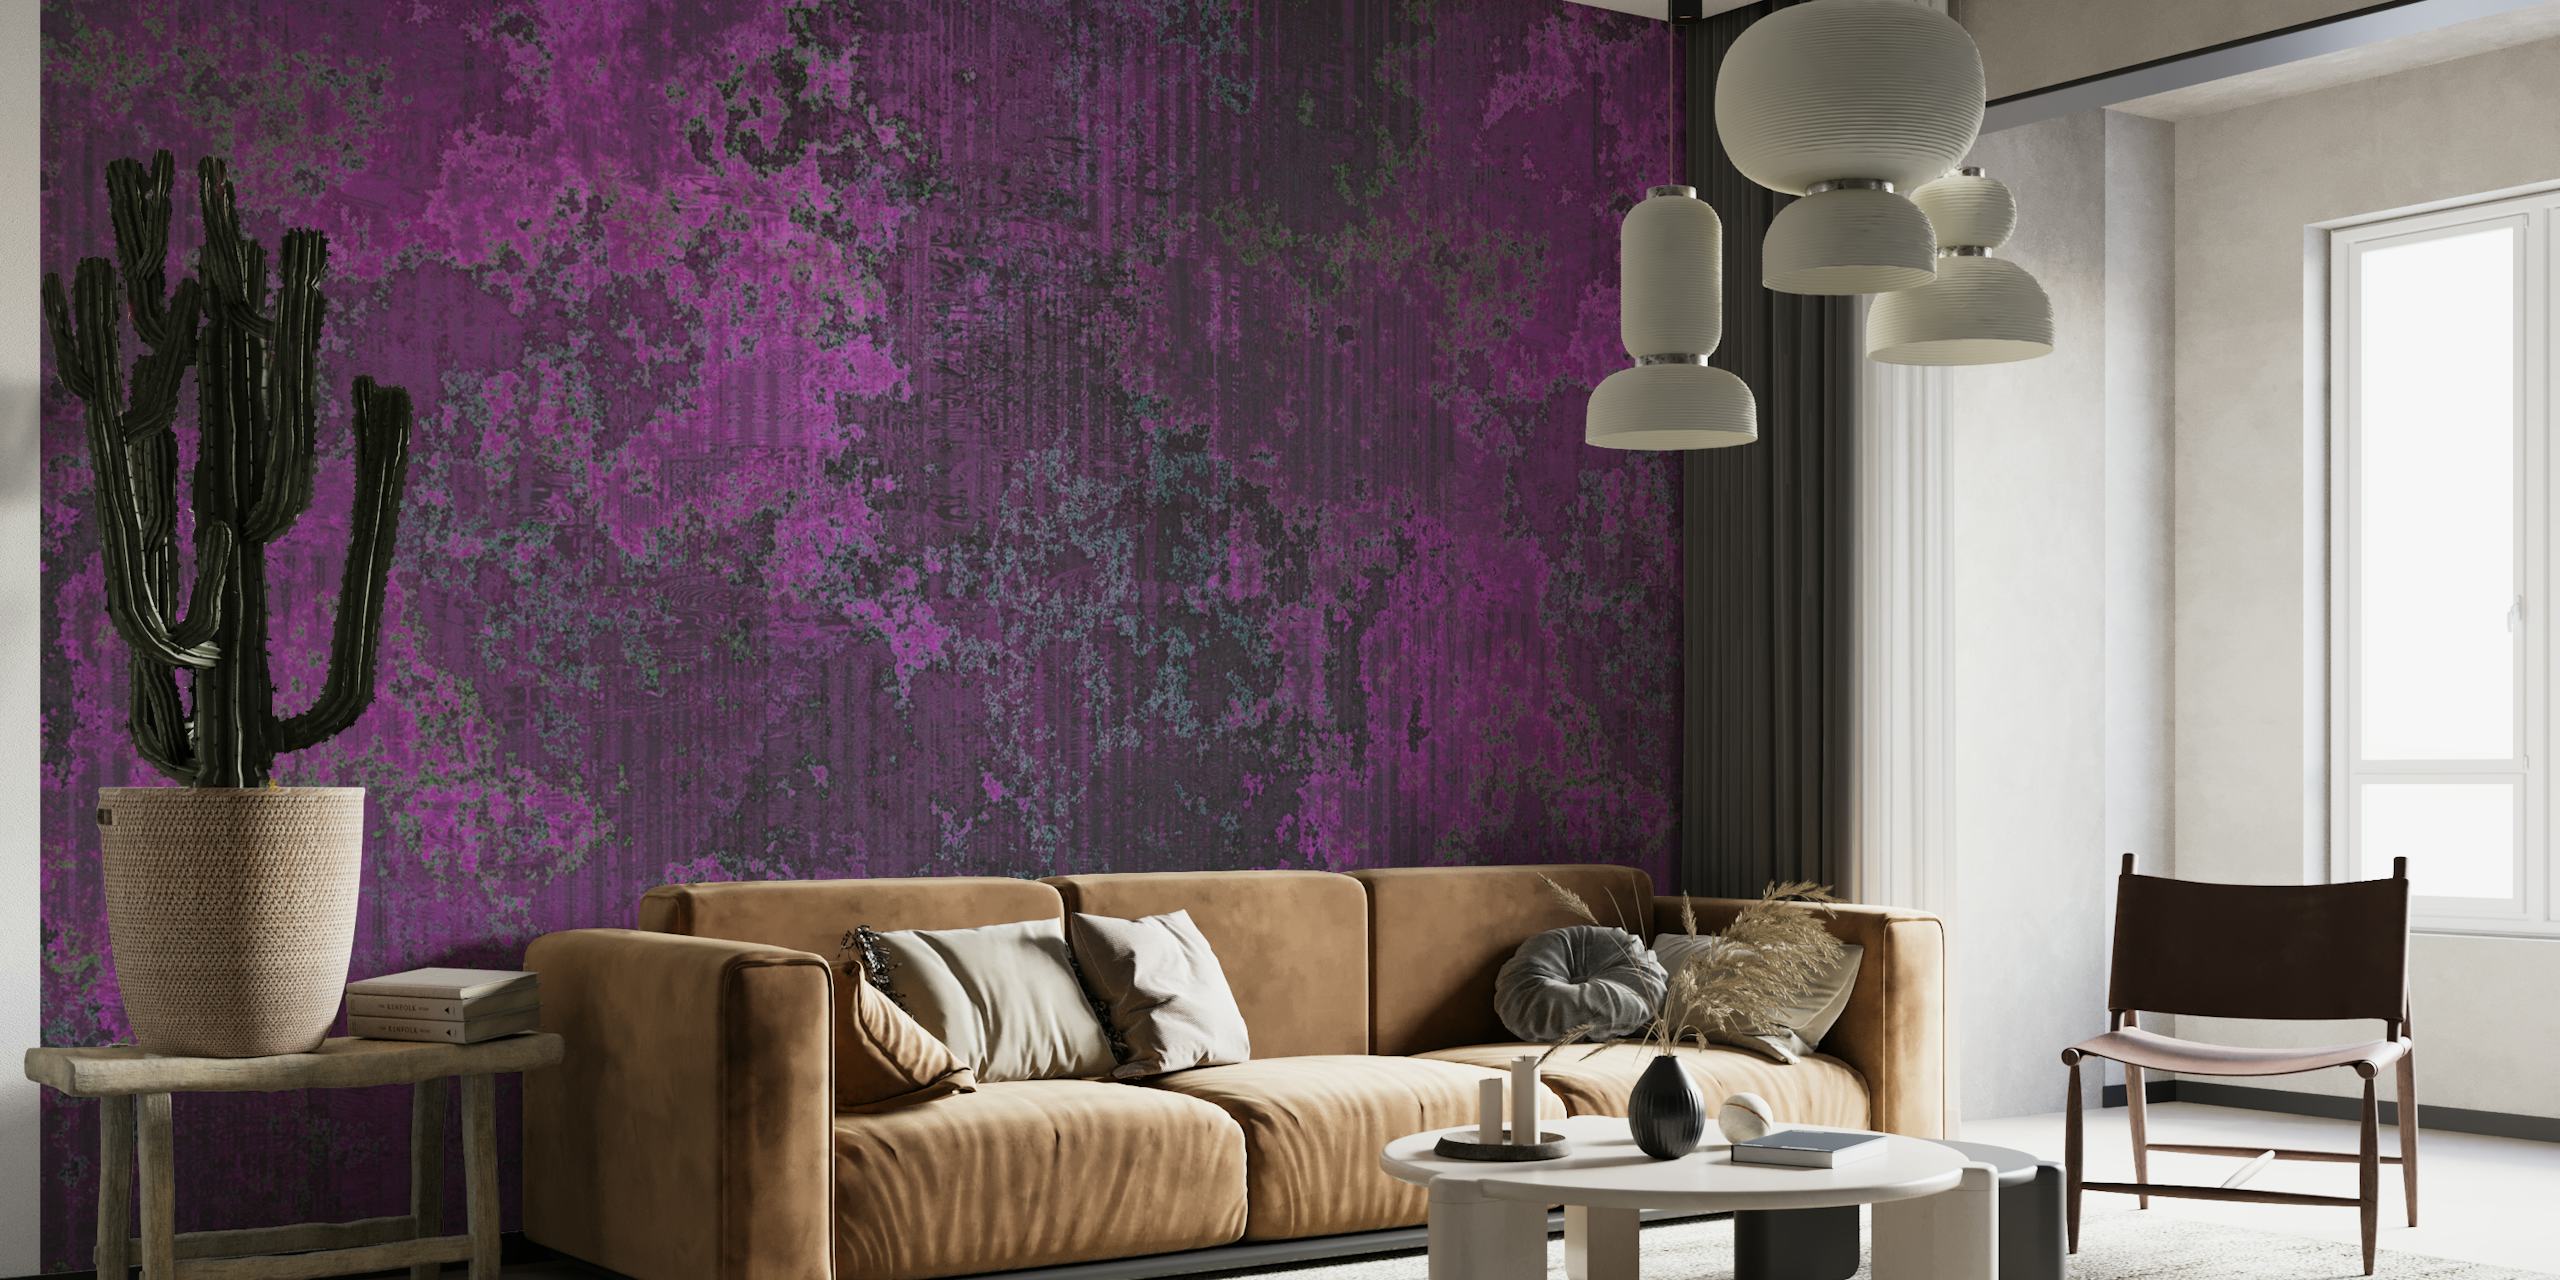 A textured wall mural featuring distressed pink and magenta hues.